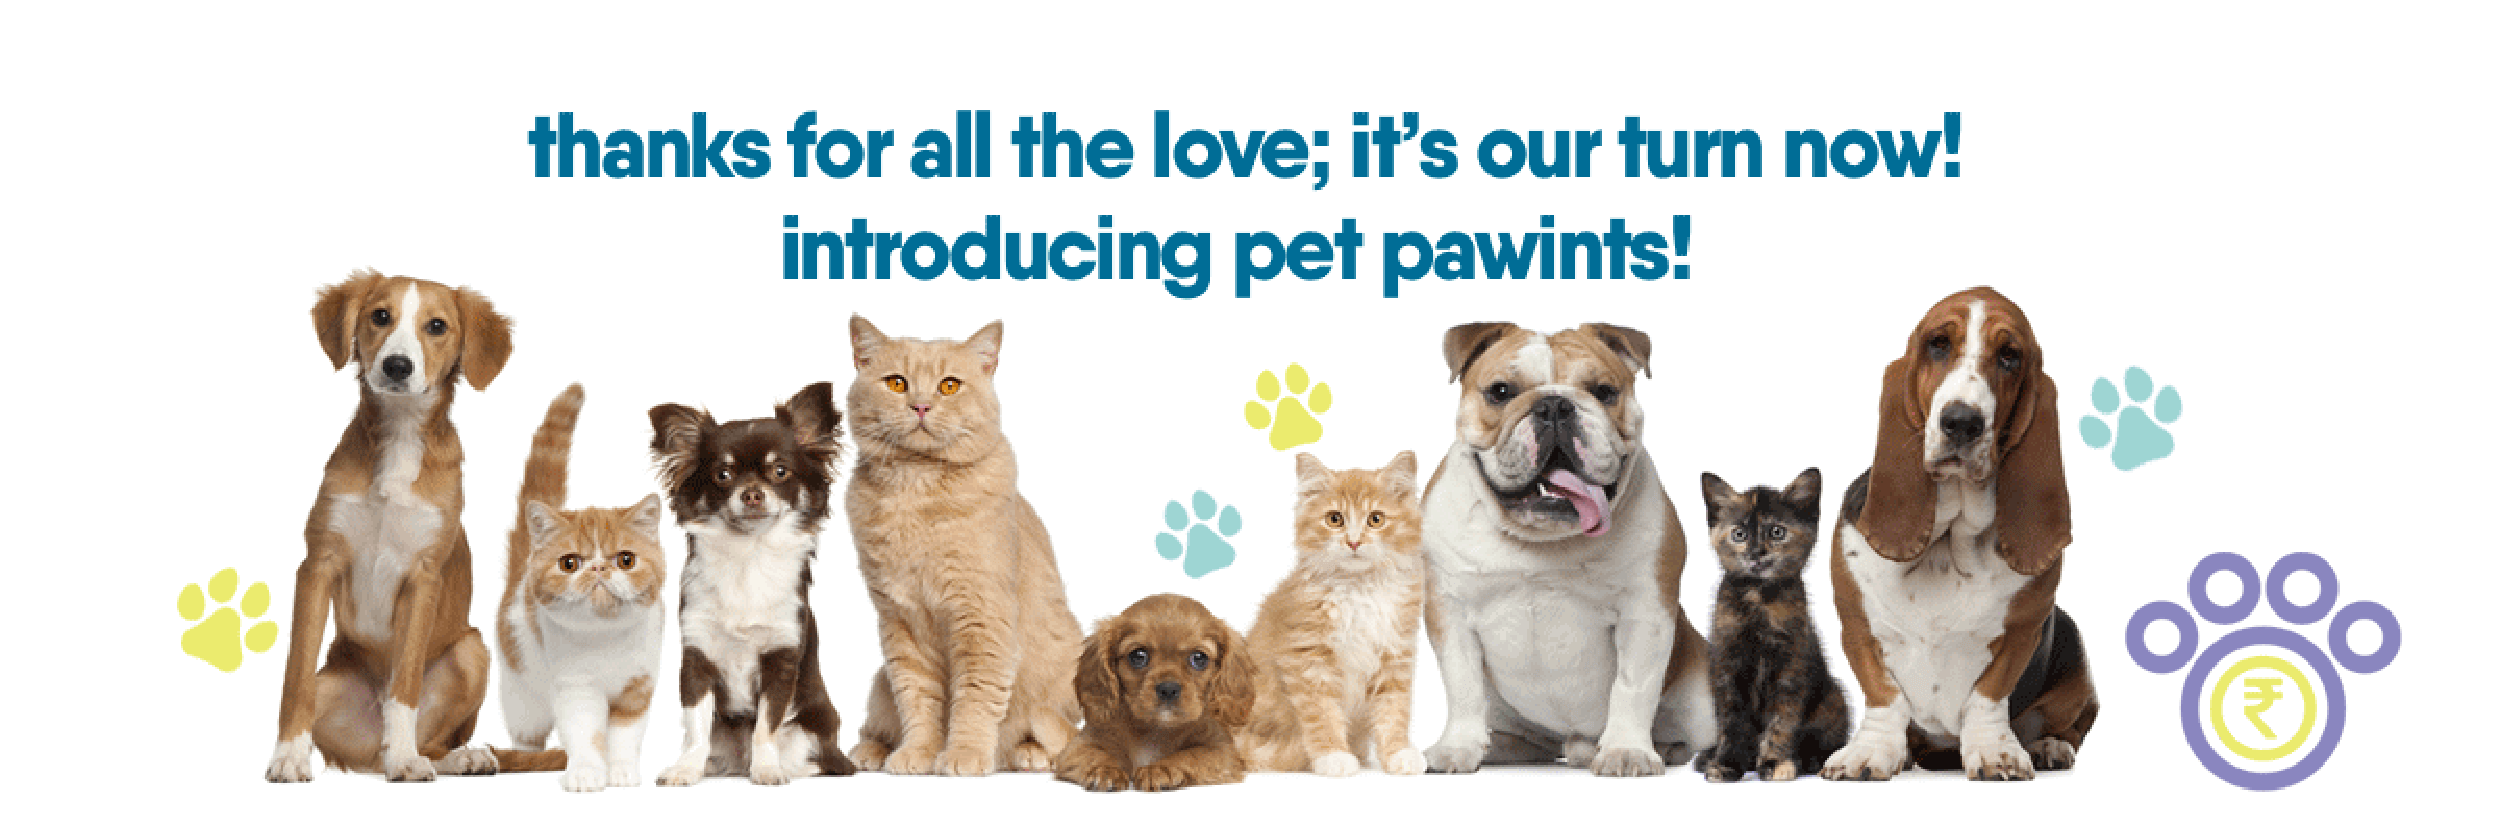 pet-pawints | Pawfectly Made